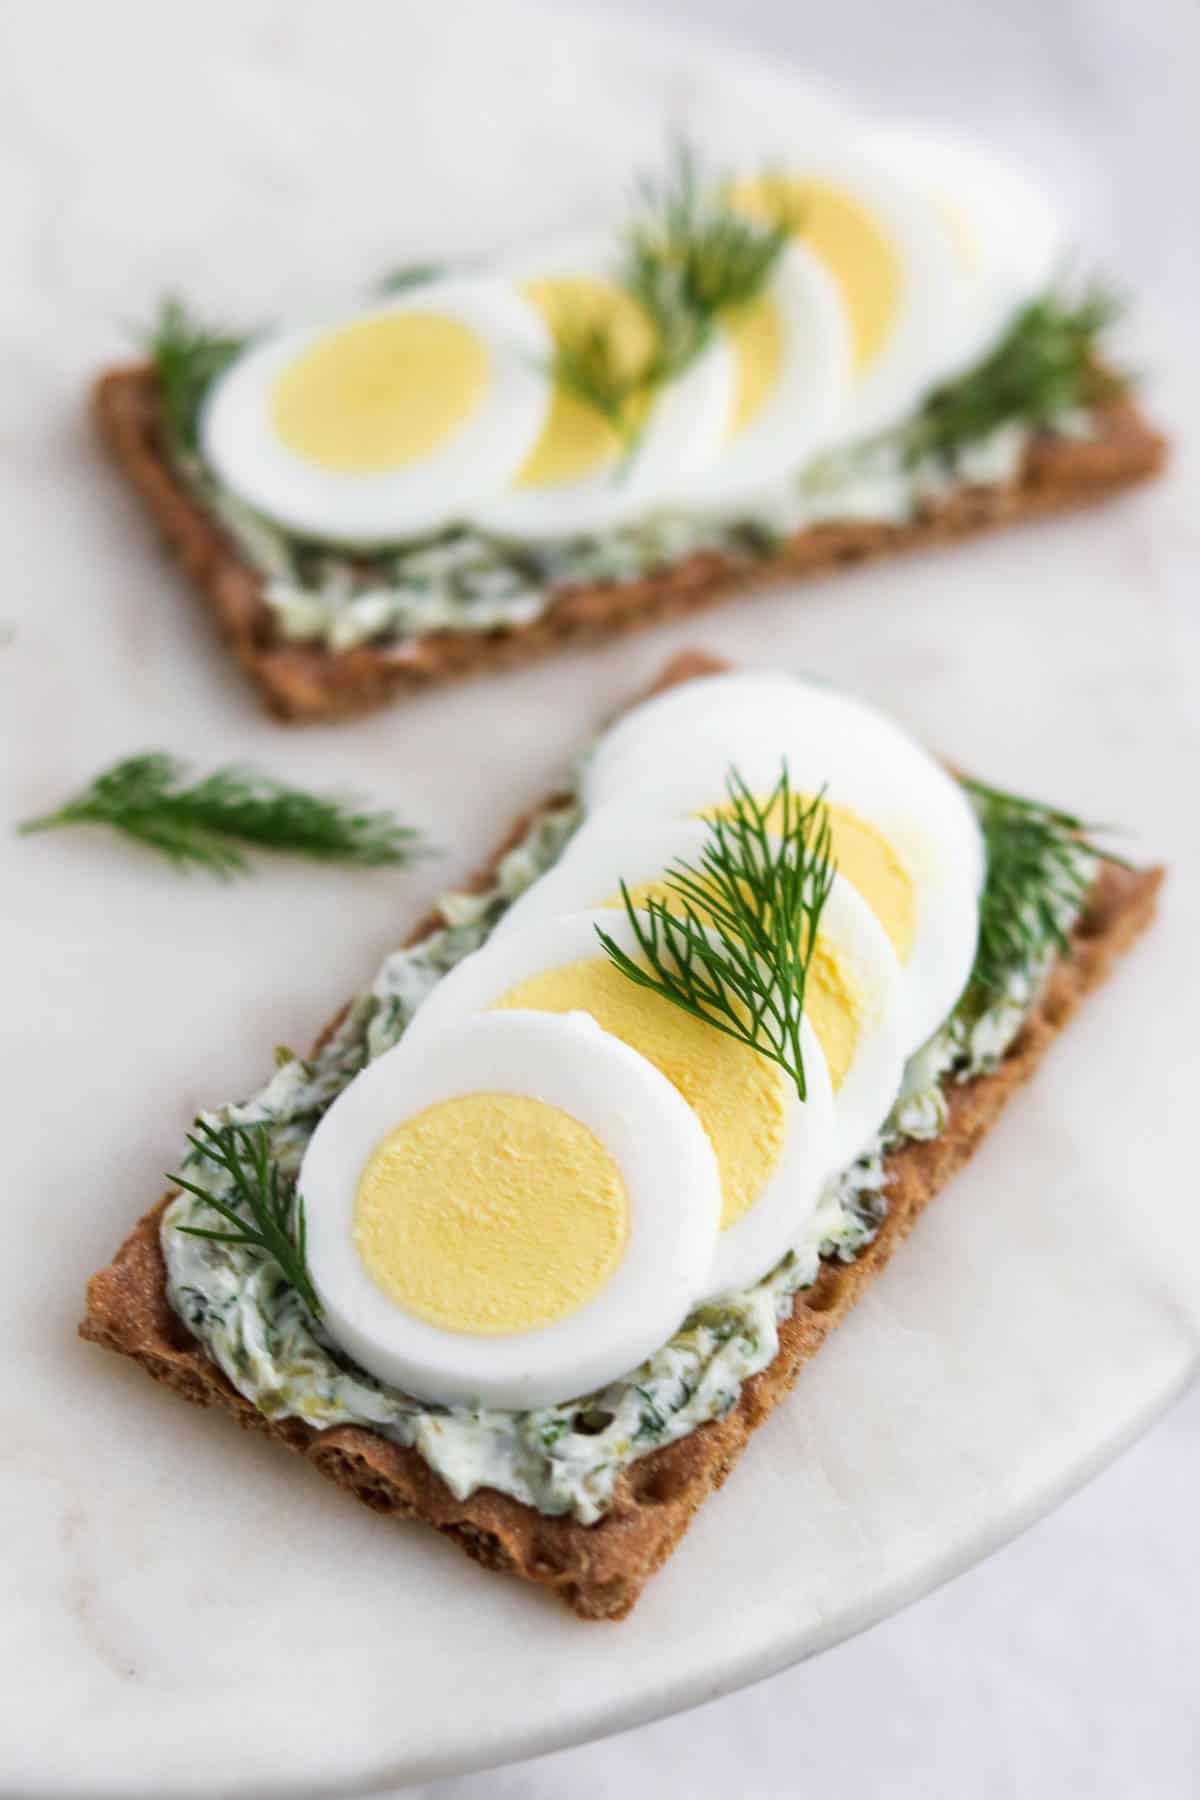 Crispbread topped with dill caper butter and slices of hard-boiled egg and dill sprigs.